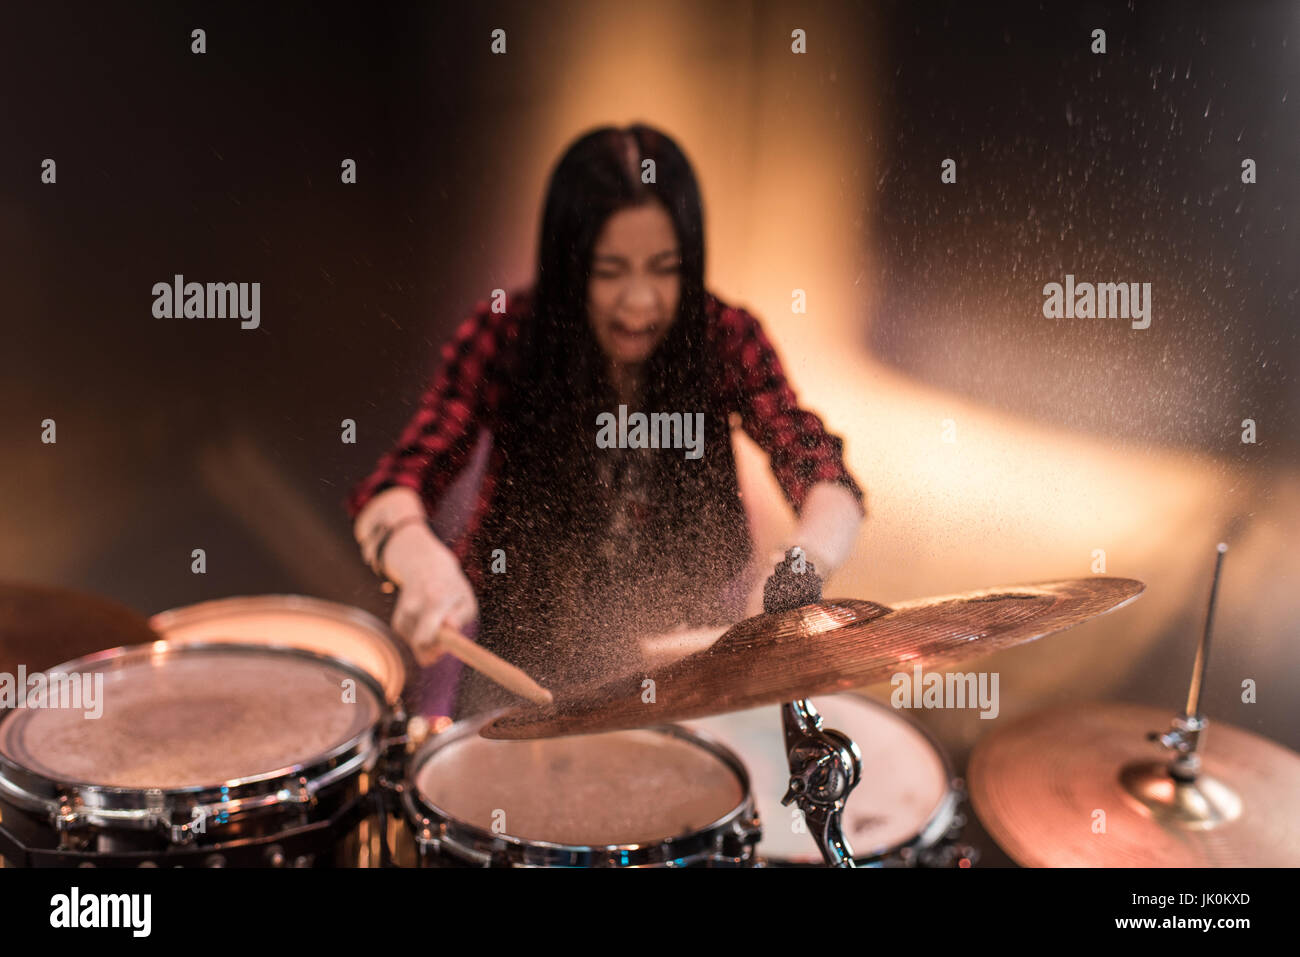 Rock and roll girl playing hard rock music with drums set Stock Photo